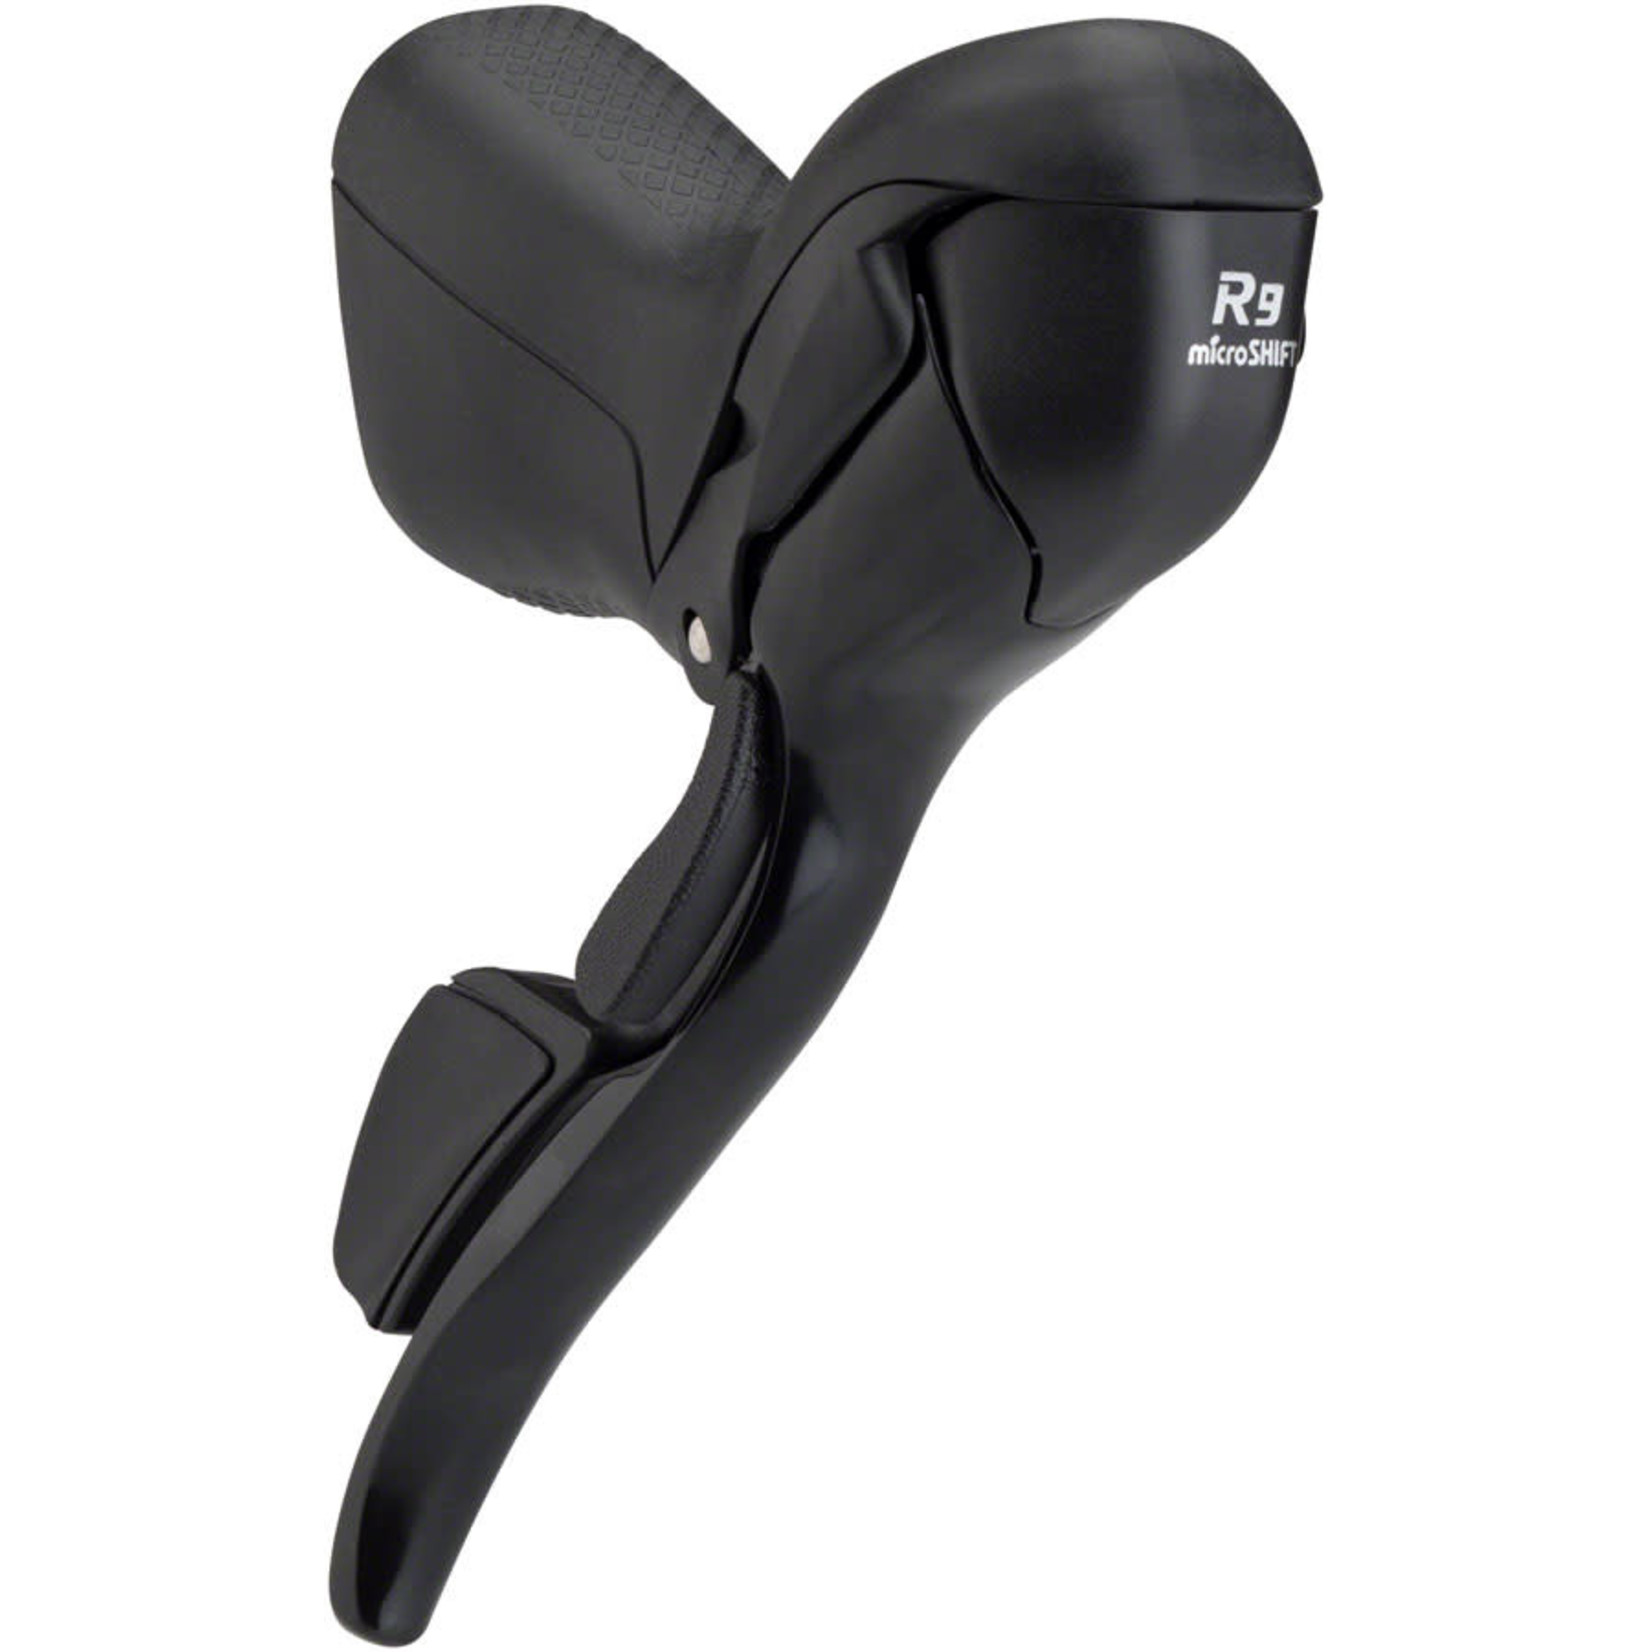 microSHIFT R9 Right Drop Bar Shift Lever 9-Speed Shimano Compatible